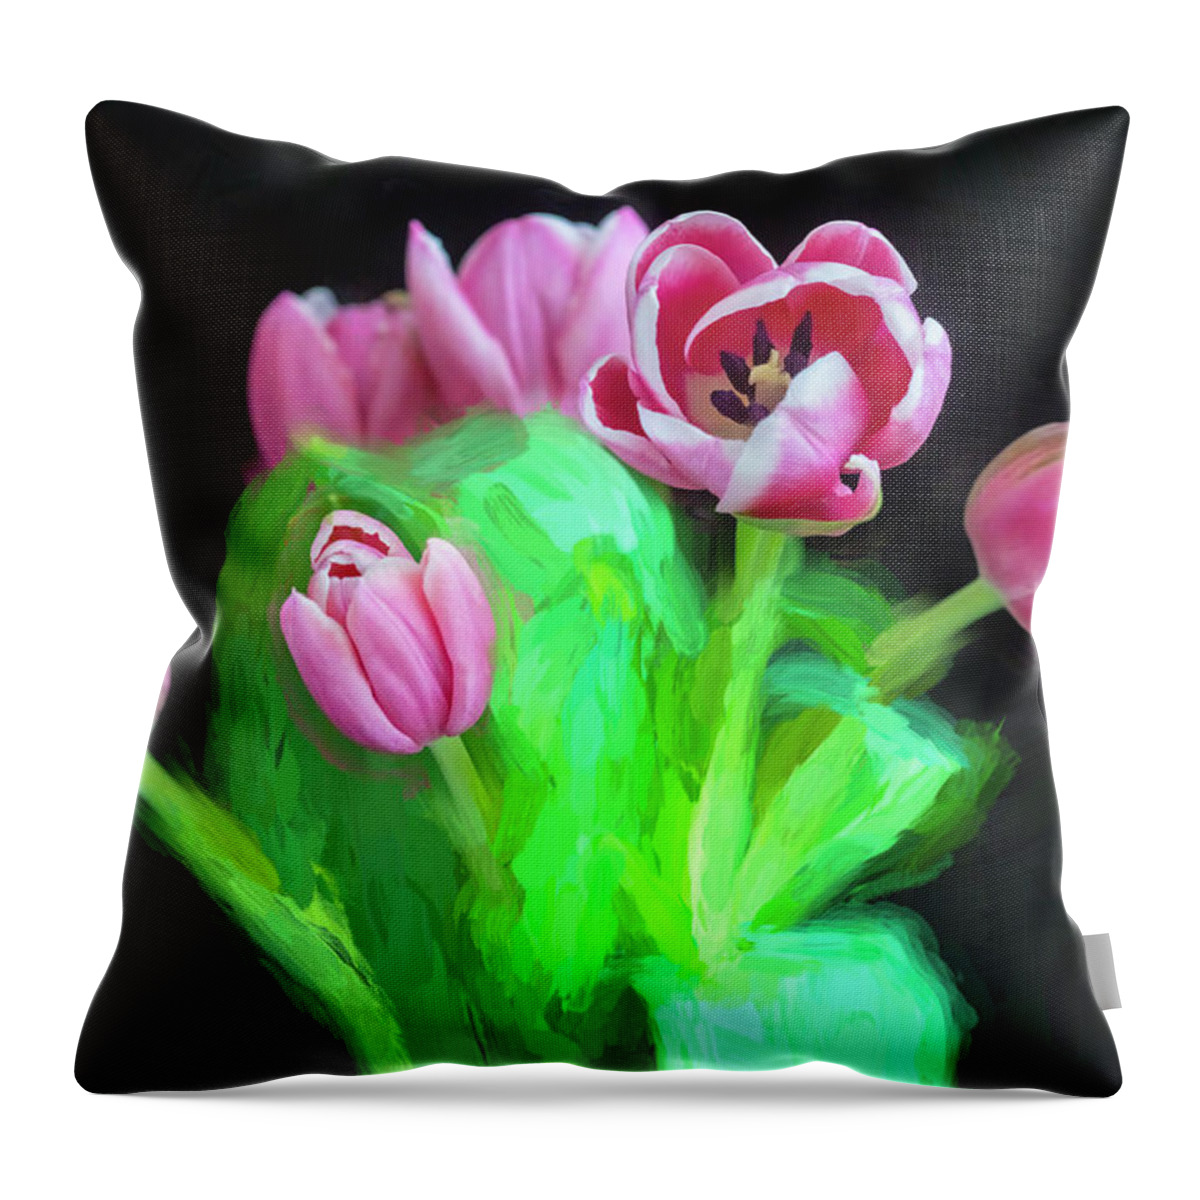 Tulips Throw Pillow featuring the photograph Pink Tulips Pink Impression X1043 by Rich Franco